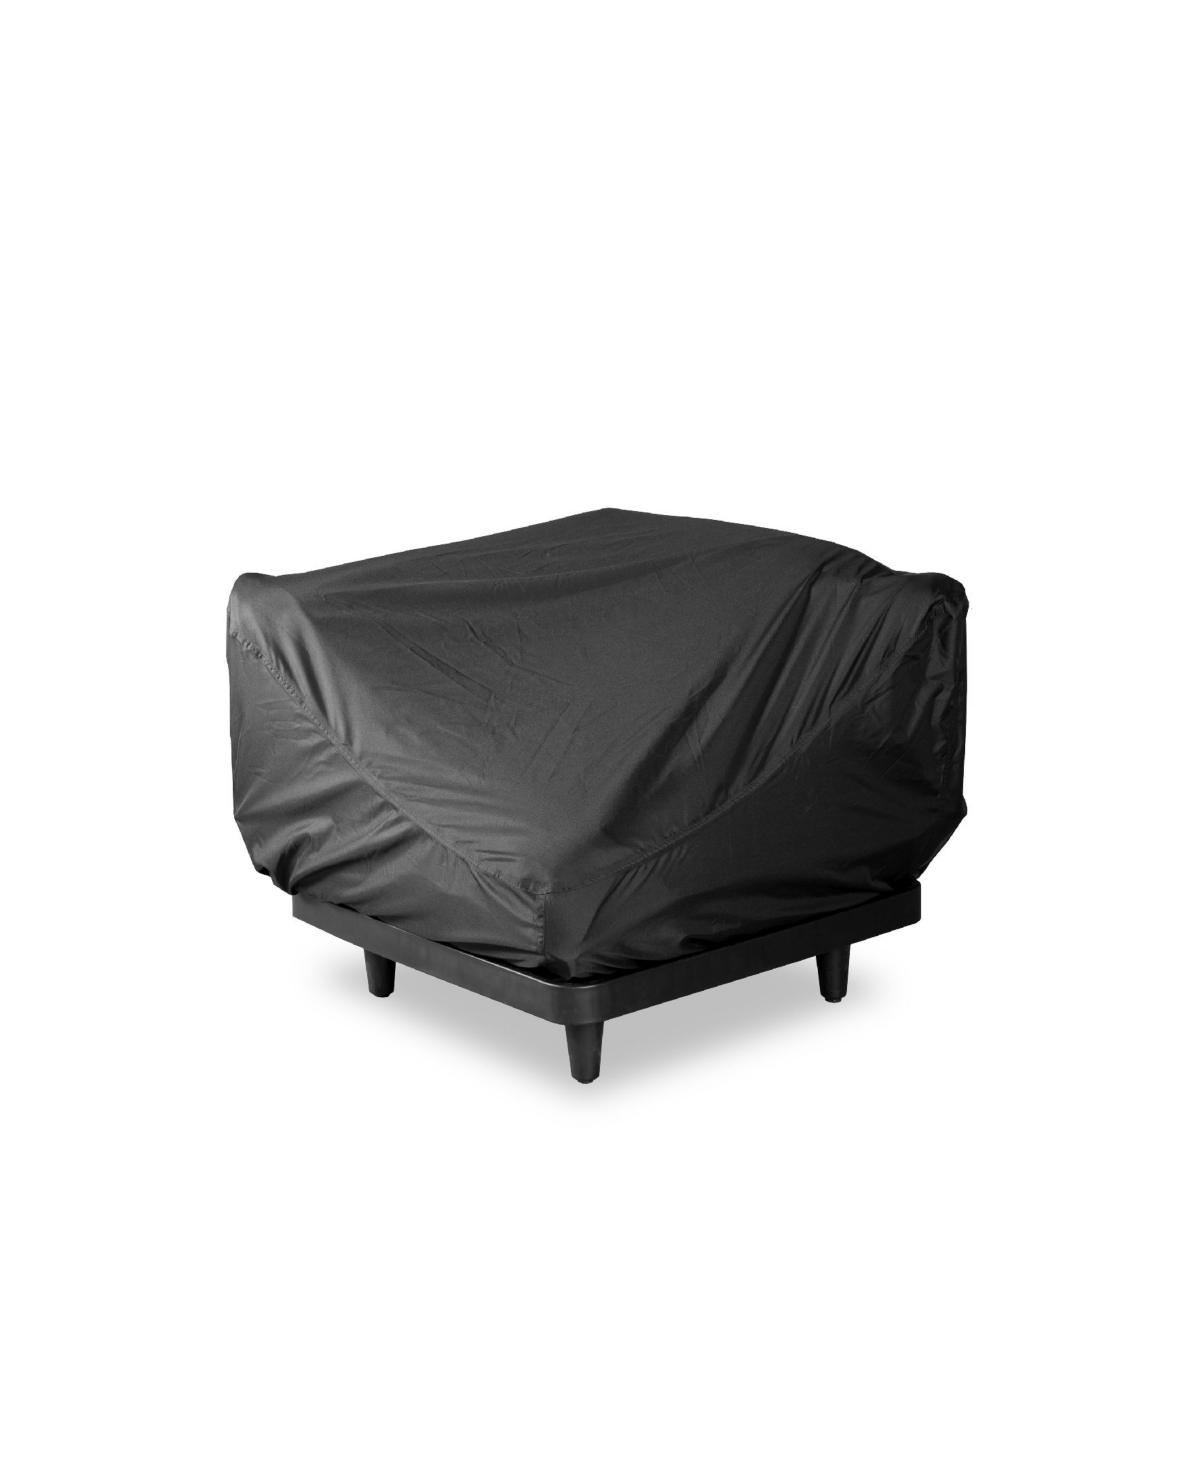 Fatboy Paletti Outdoor Modular 1-Seat Cover Lounge